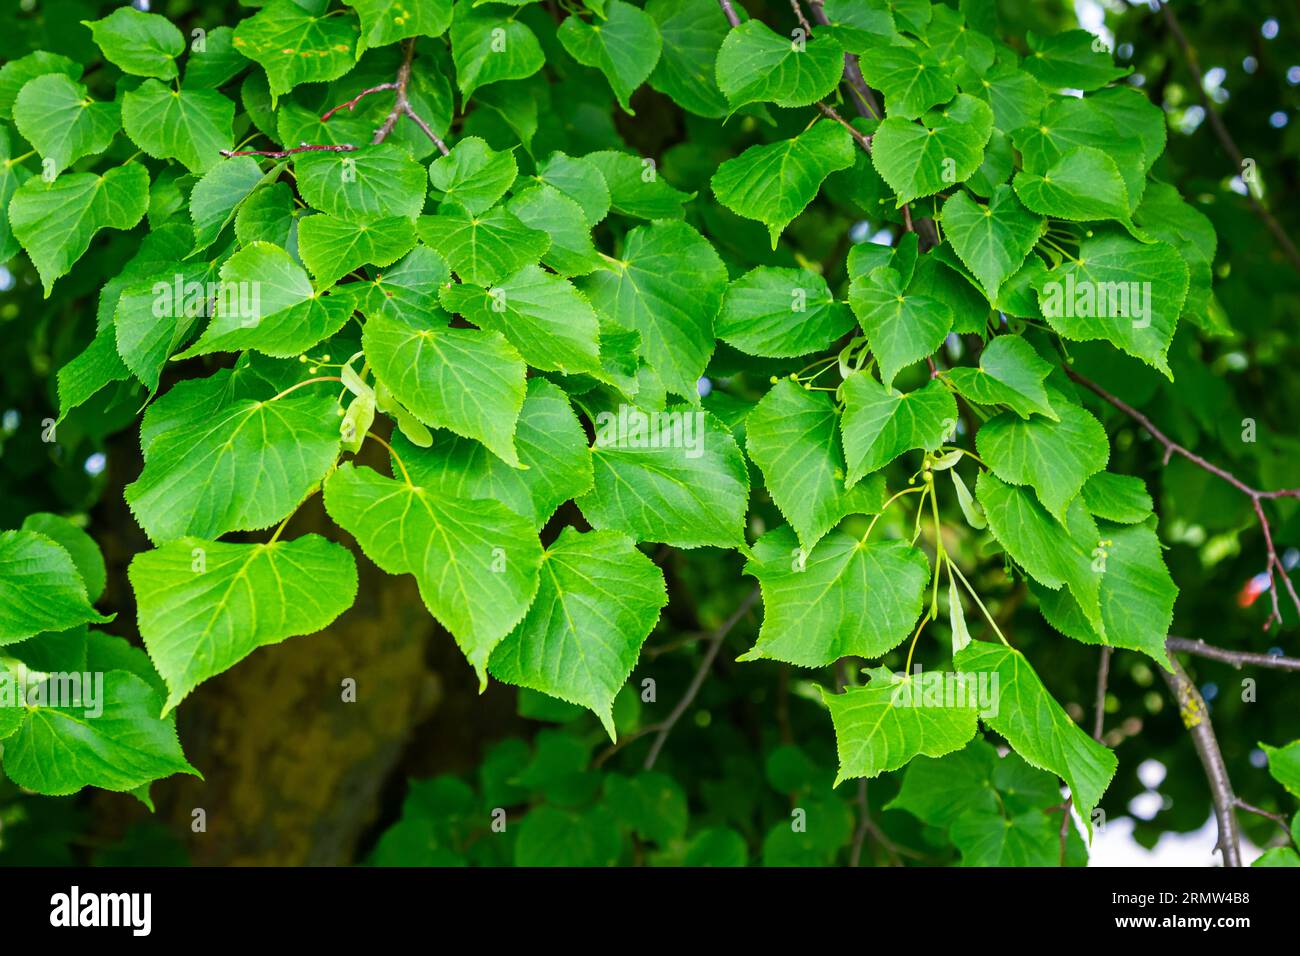 Tilia cordata leaves and fruits growing on tree branches. Stock Photo